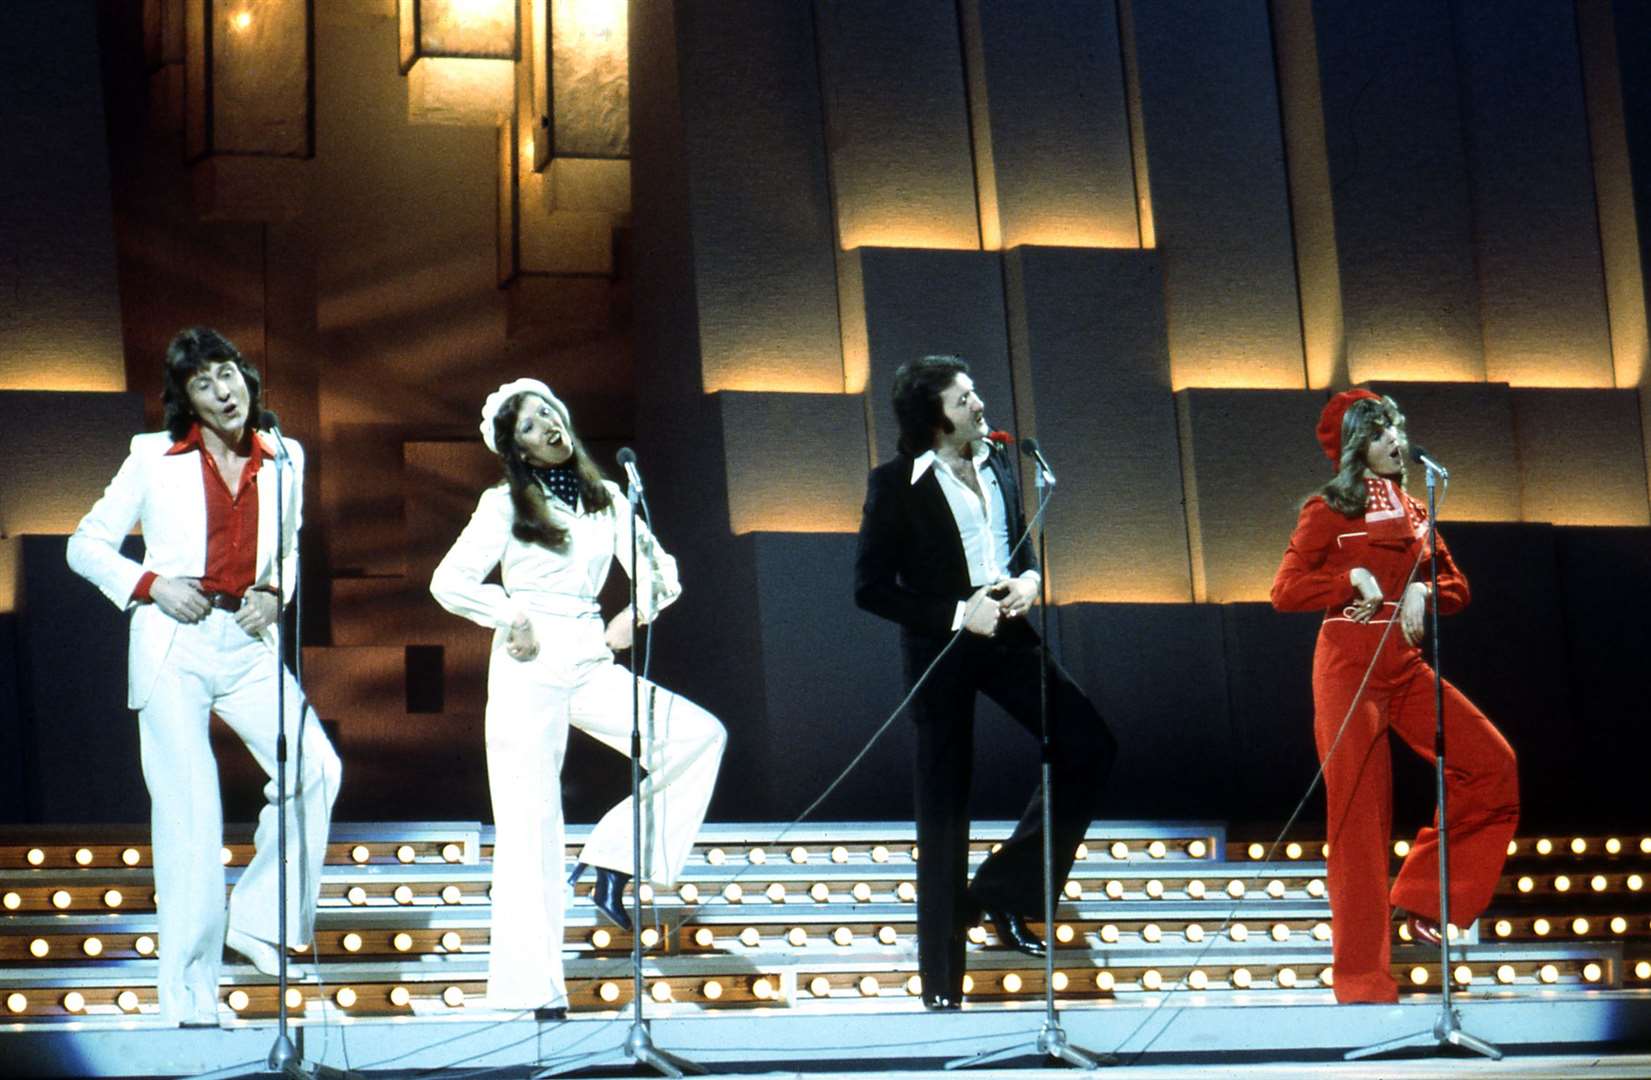 Is it time for this? The Brotherhood of Man at the Eurovision Song Contest